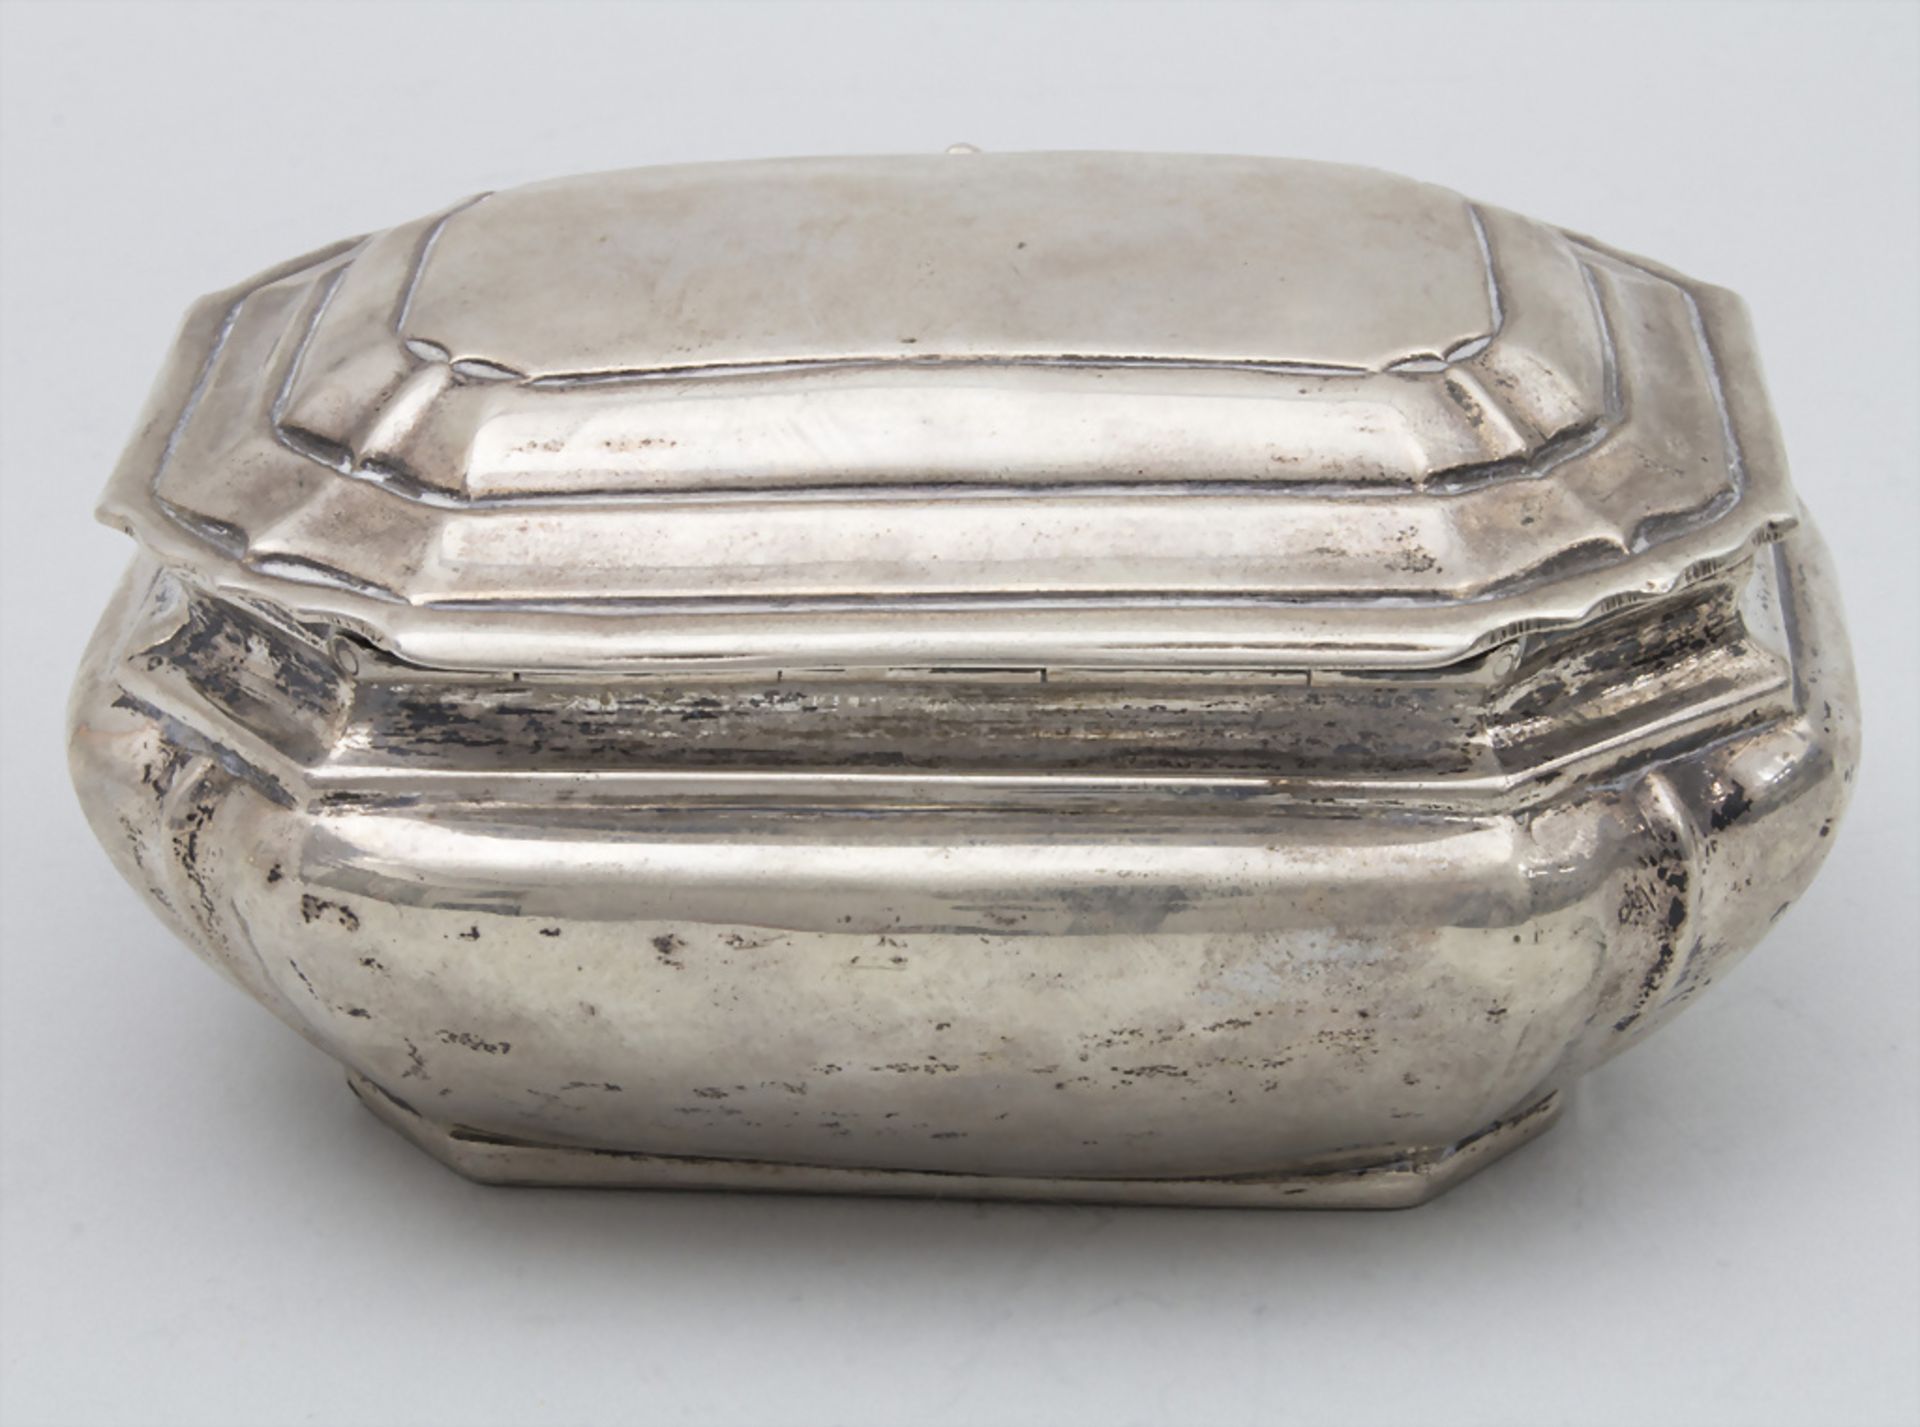 Barock Dose / A baroque silver box, Stephan Christian Wolter, Olawa / Ohlau in Schlesien, um 1725 - Image 2 of 8